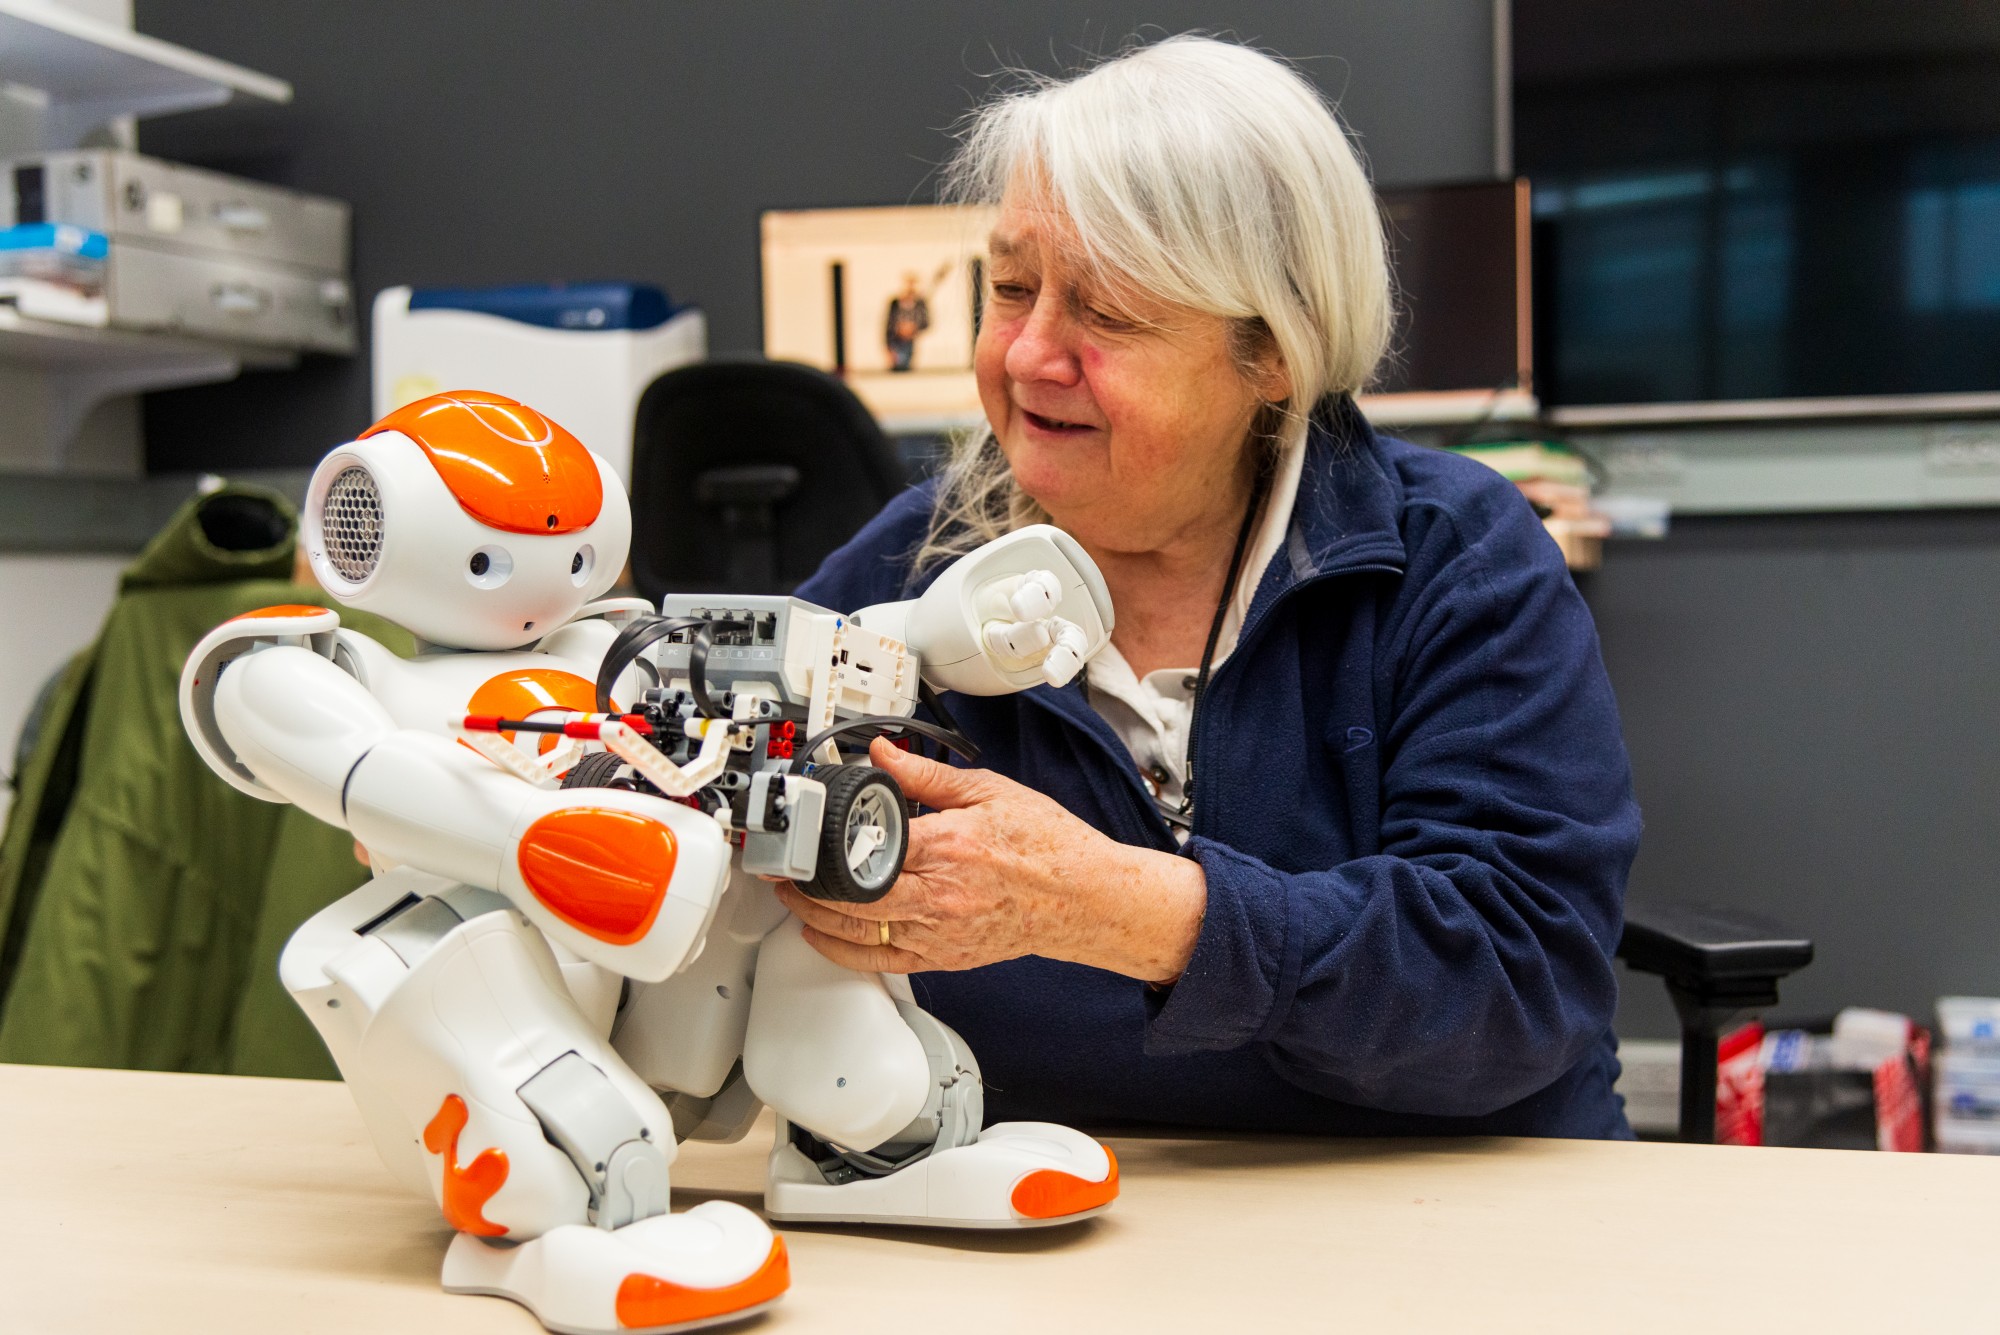 Professor of Robotics Dr. Maria Gini interacts with a robot in Shepherd Labs on Thursday, Feb. 6. The University of Minnesota is set to begin offering a Master’s program for robotics in Fall of 2020. 